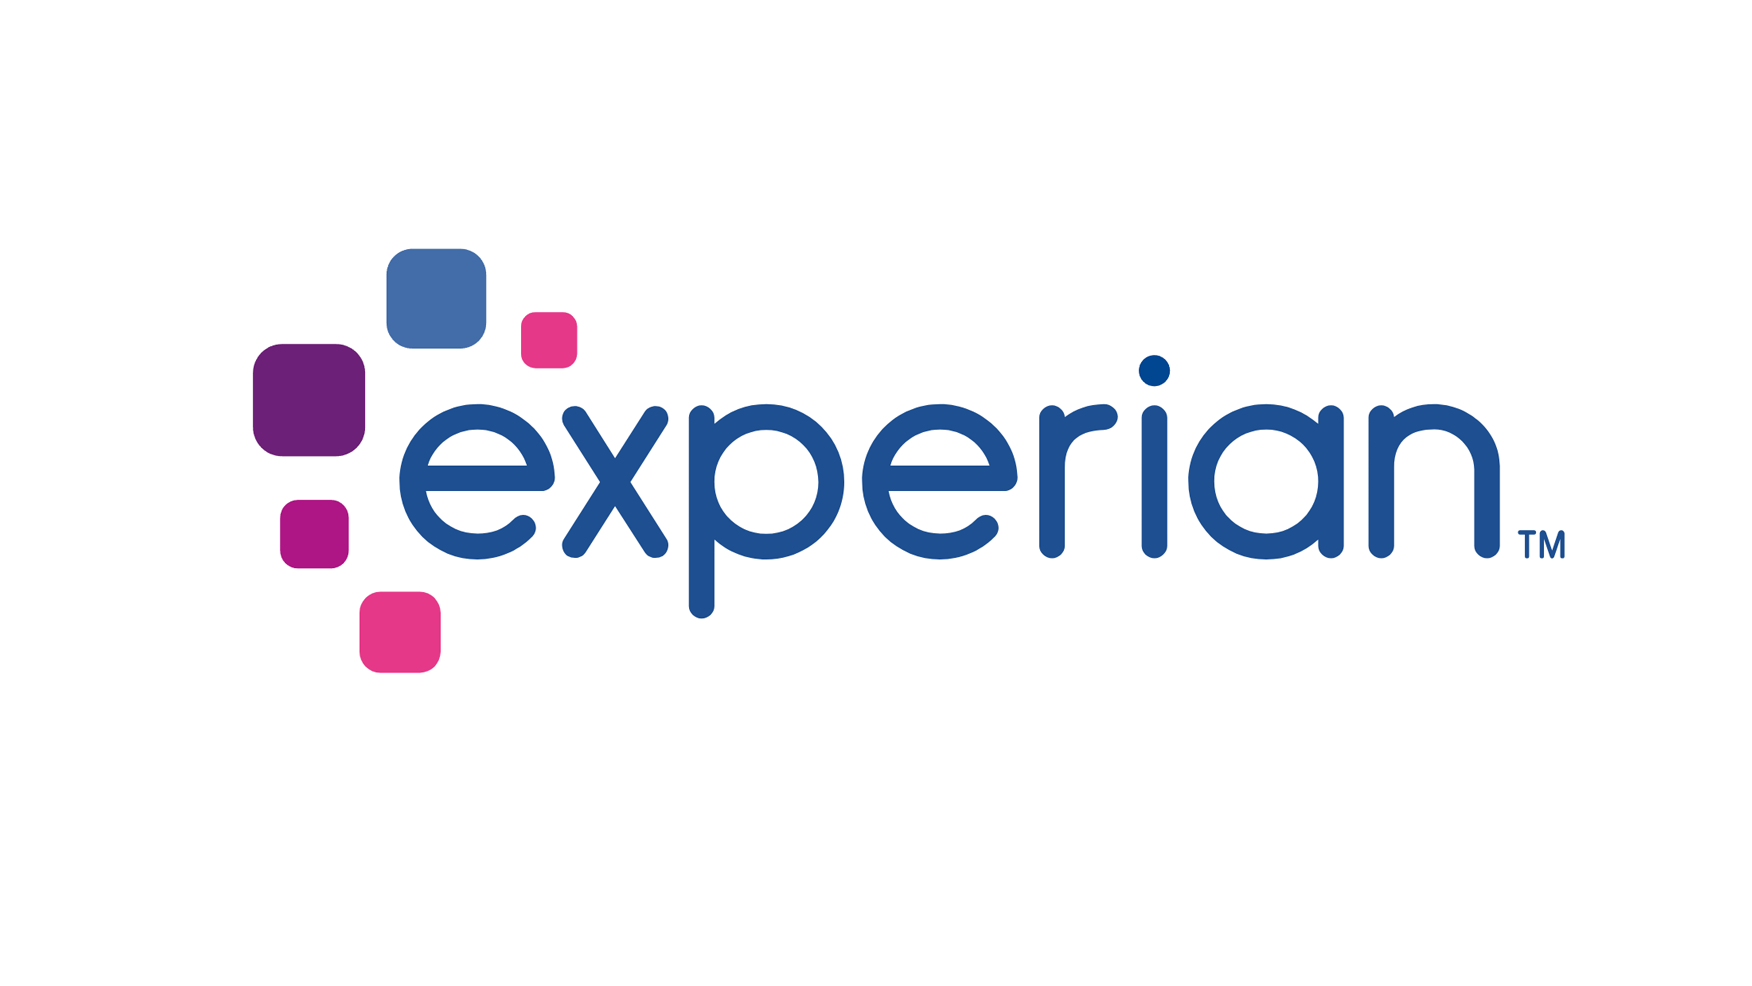 Learn more about the Experian BOOST™. Source: Experian.